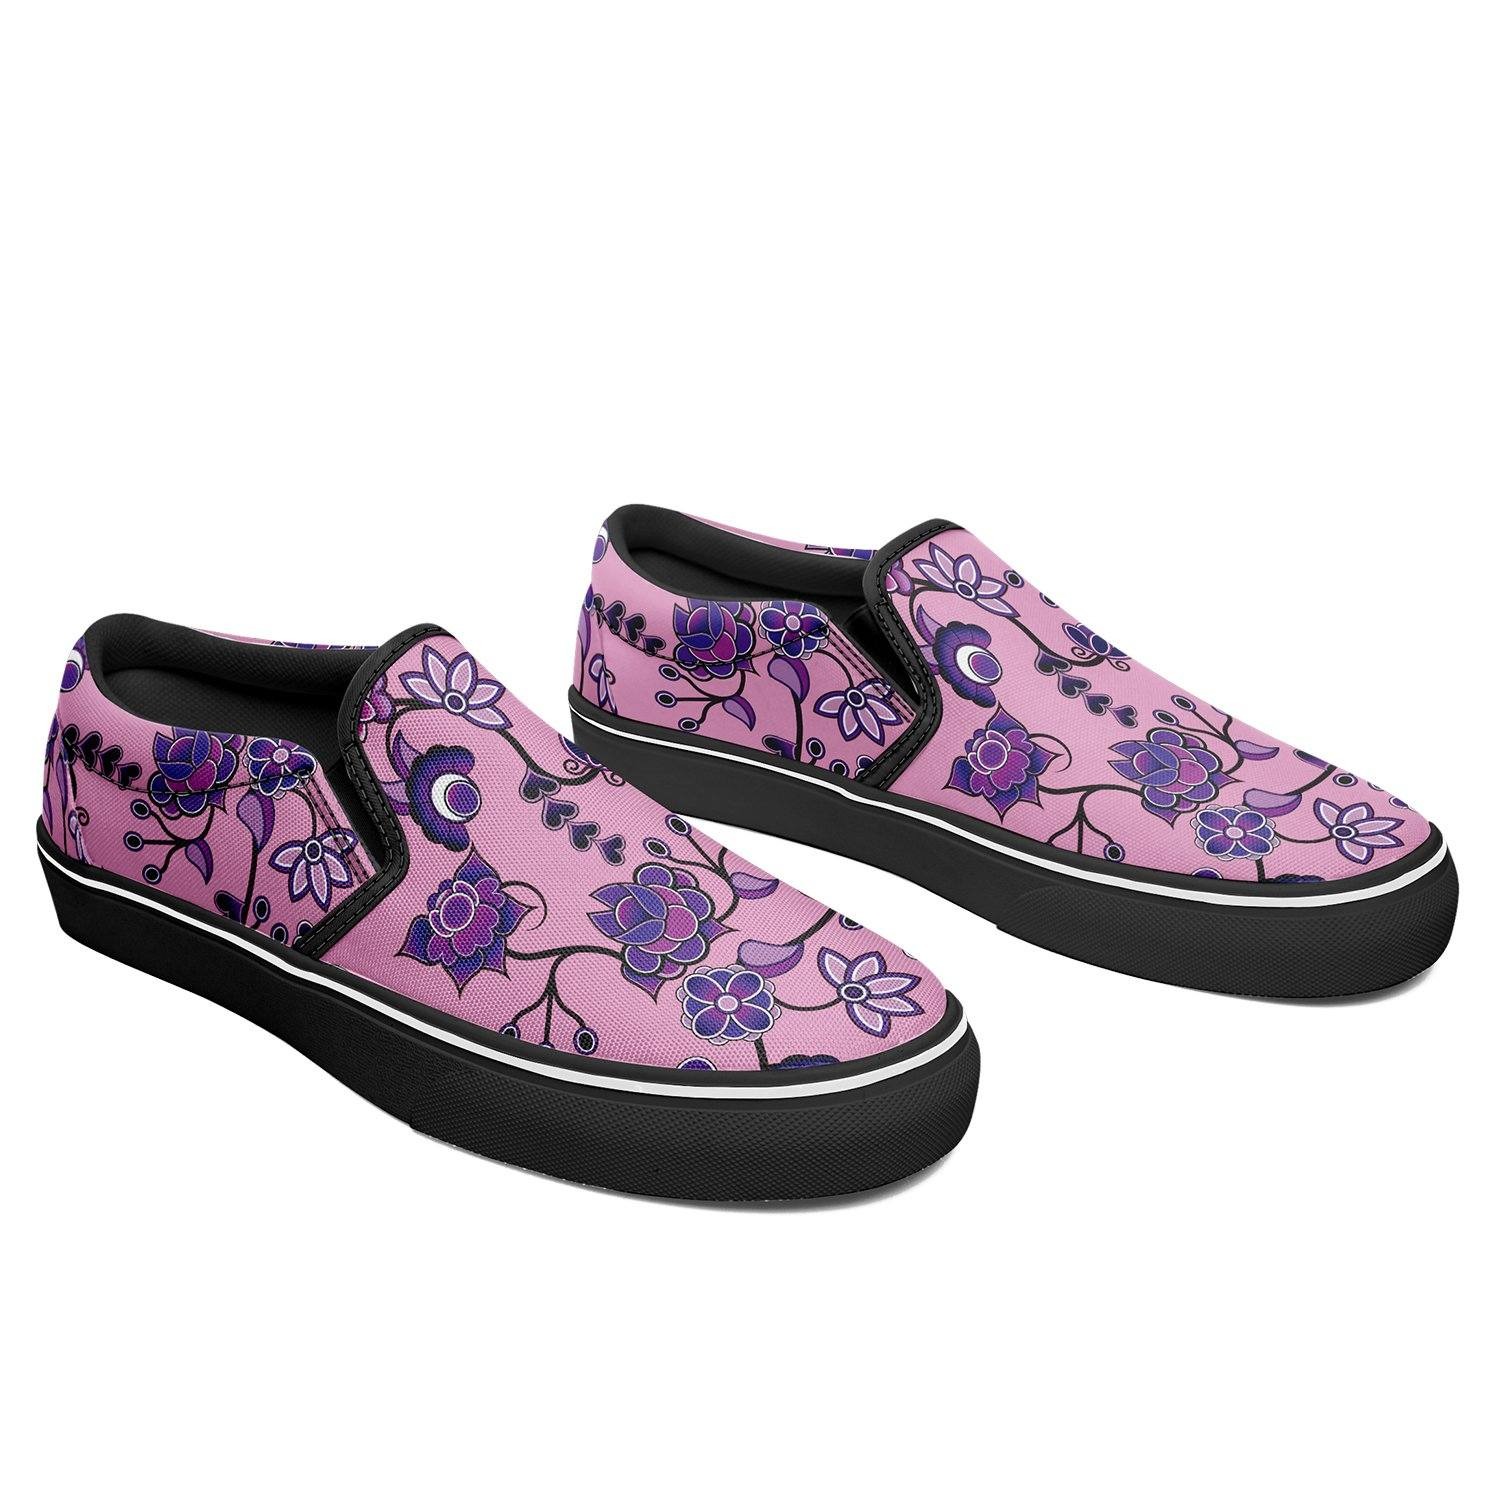 Purple Floral Amour Otoyimm Canvas Slip On Shoes T130921